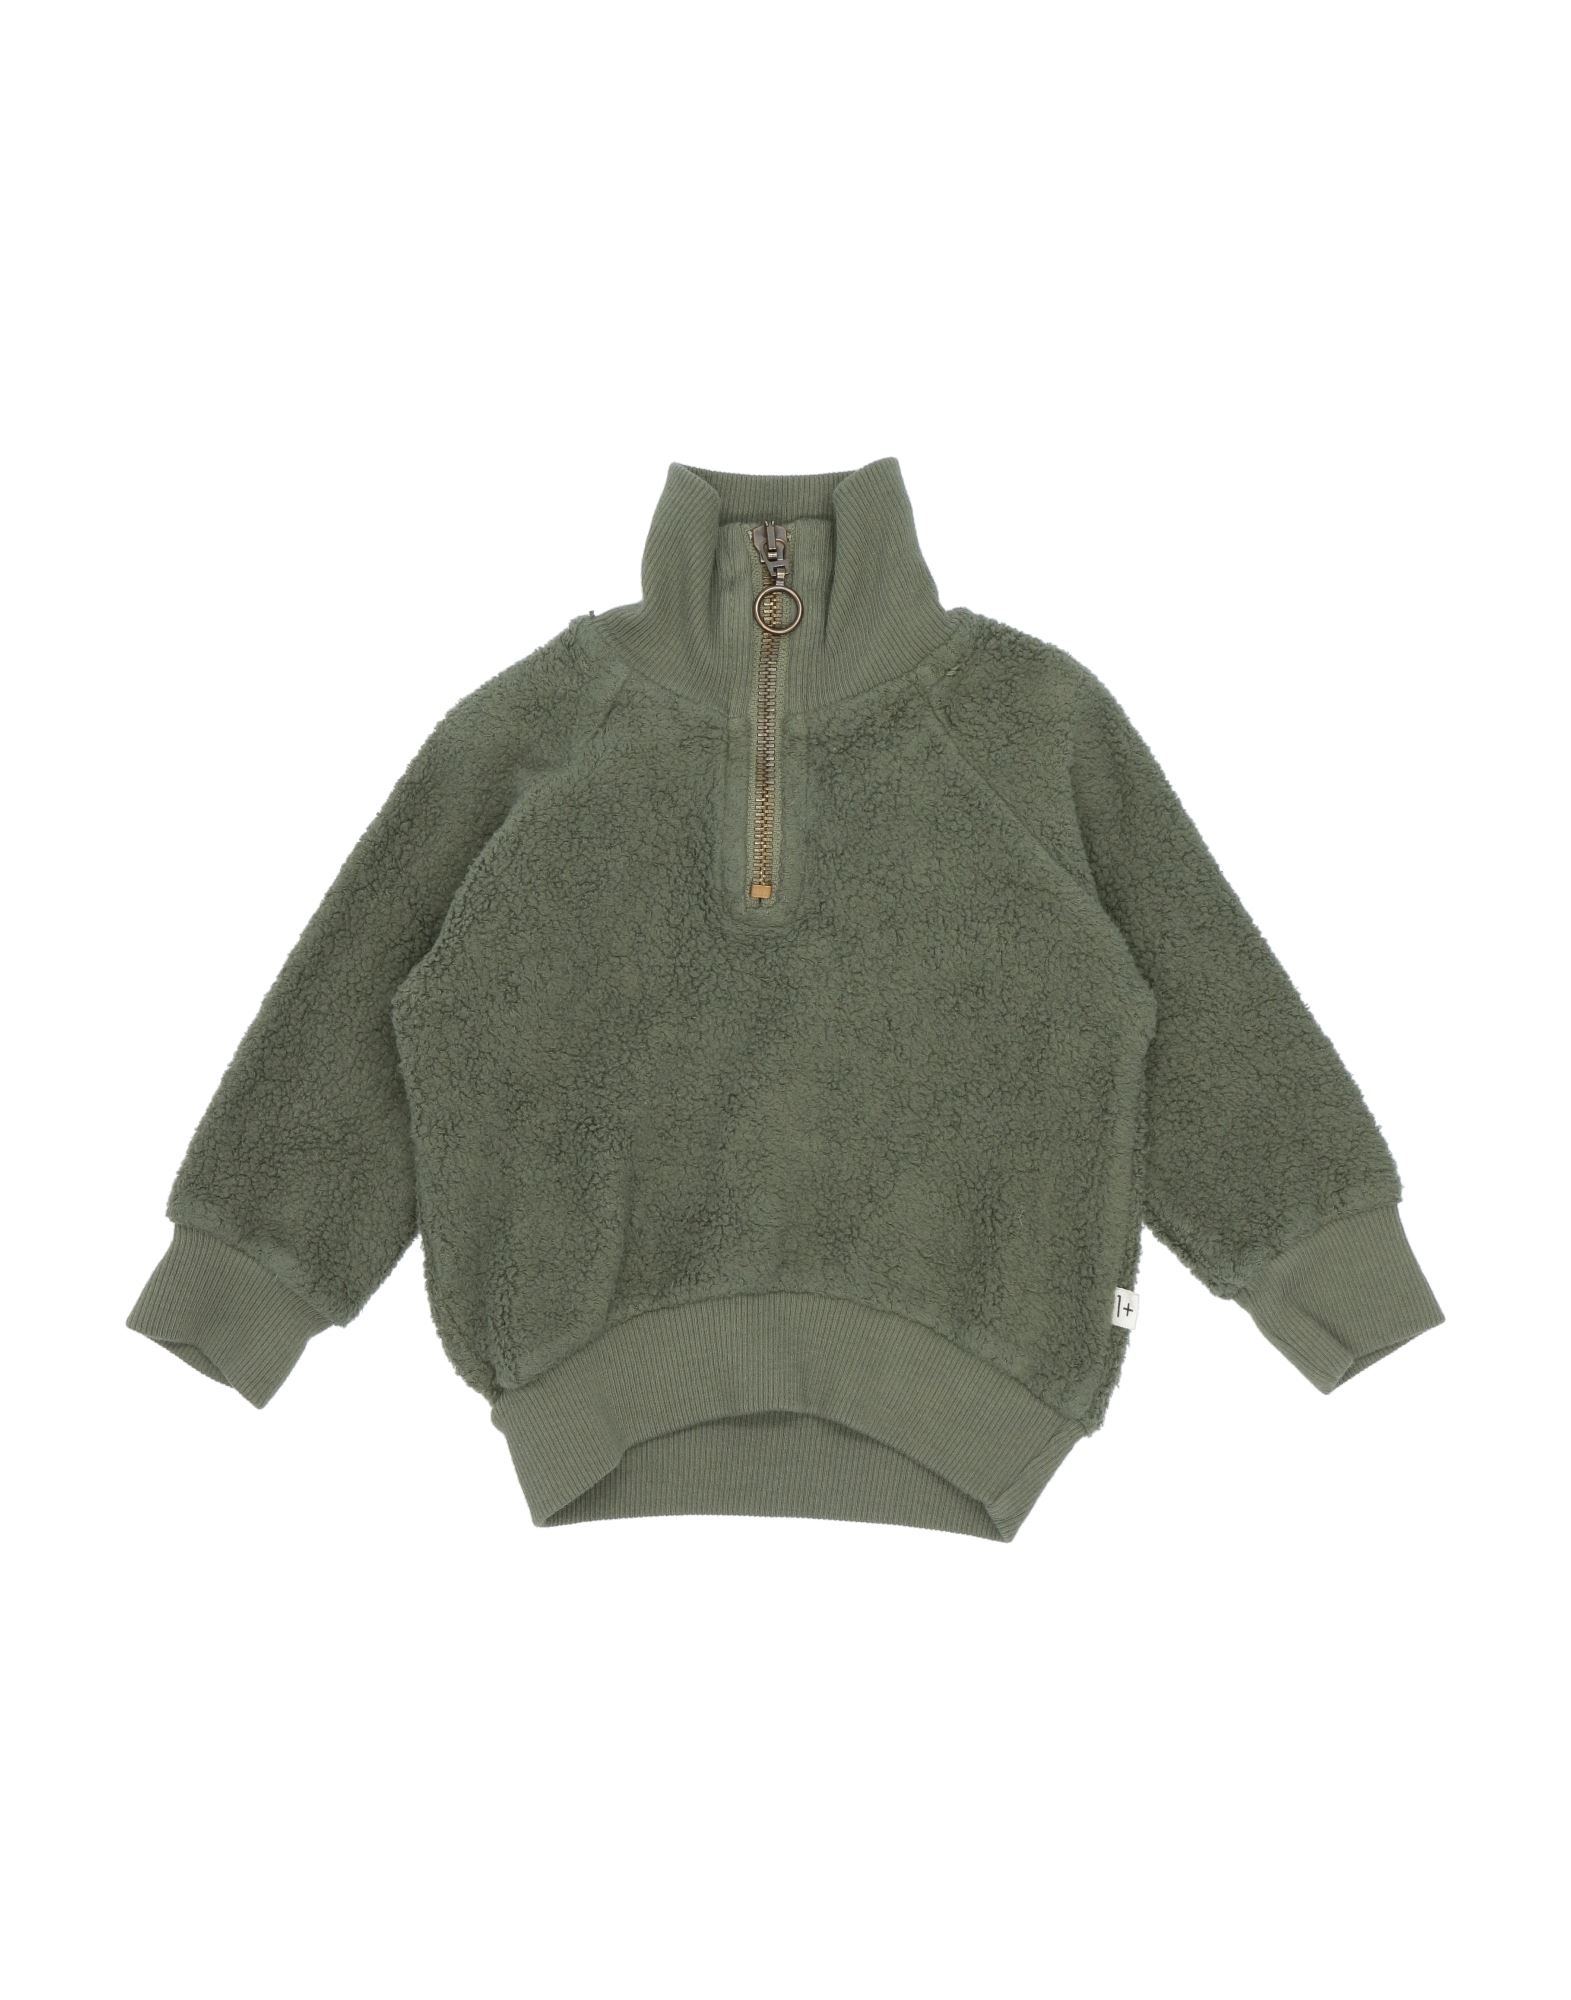 1+ In The Family Kids' 1 + In The Family Newborn Boy Sweatshirt Military Green Size 3 Cotton